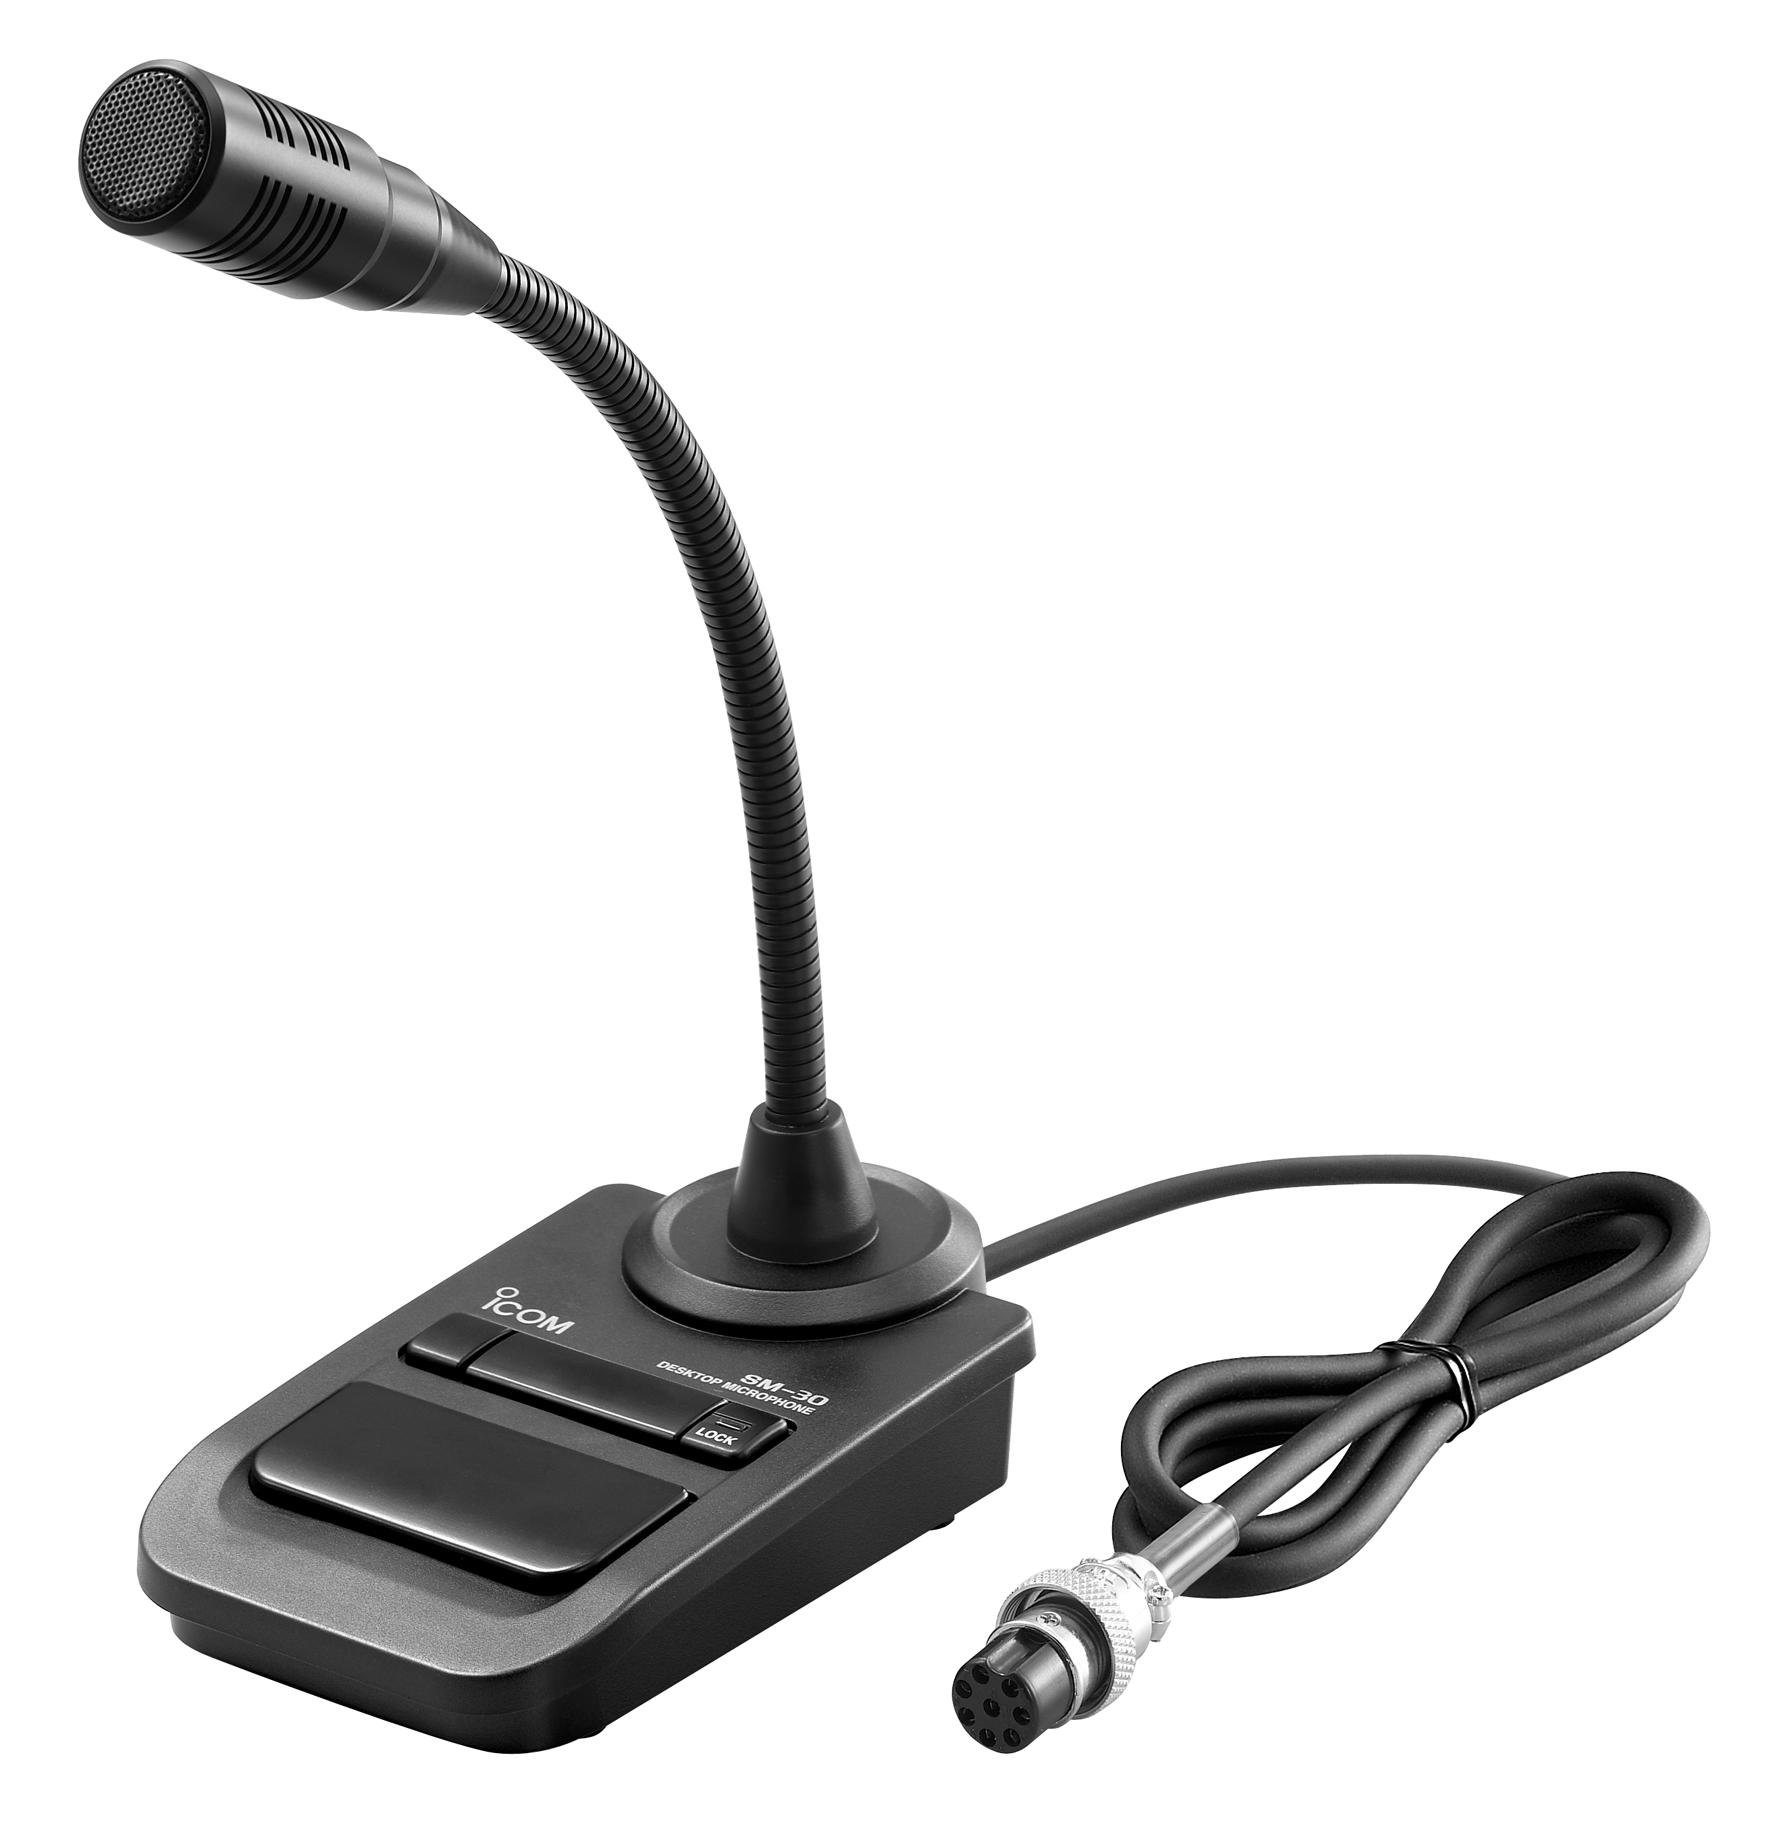 Icom SM-30 Desktop Gooseneck Microphone 8-pin metal connector; PTT / PTT lock switches, Low-cut filter designed for SSB and FM.